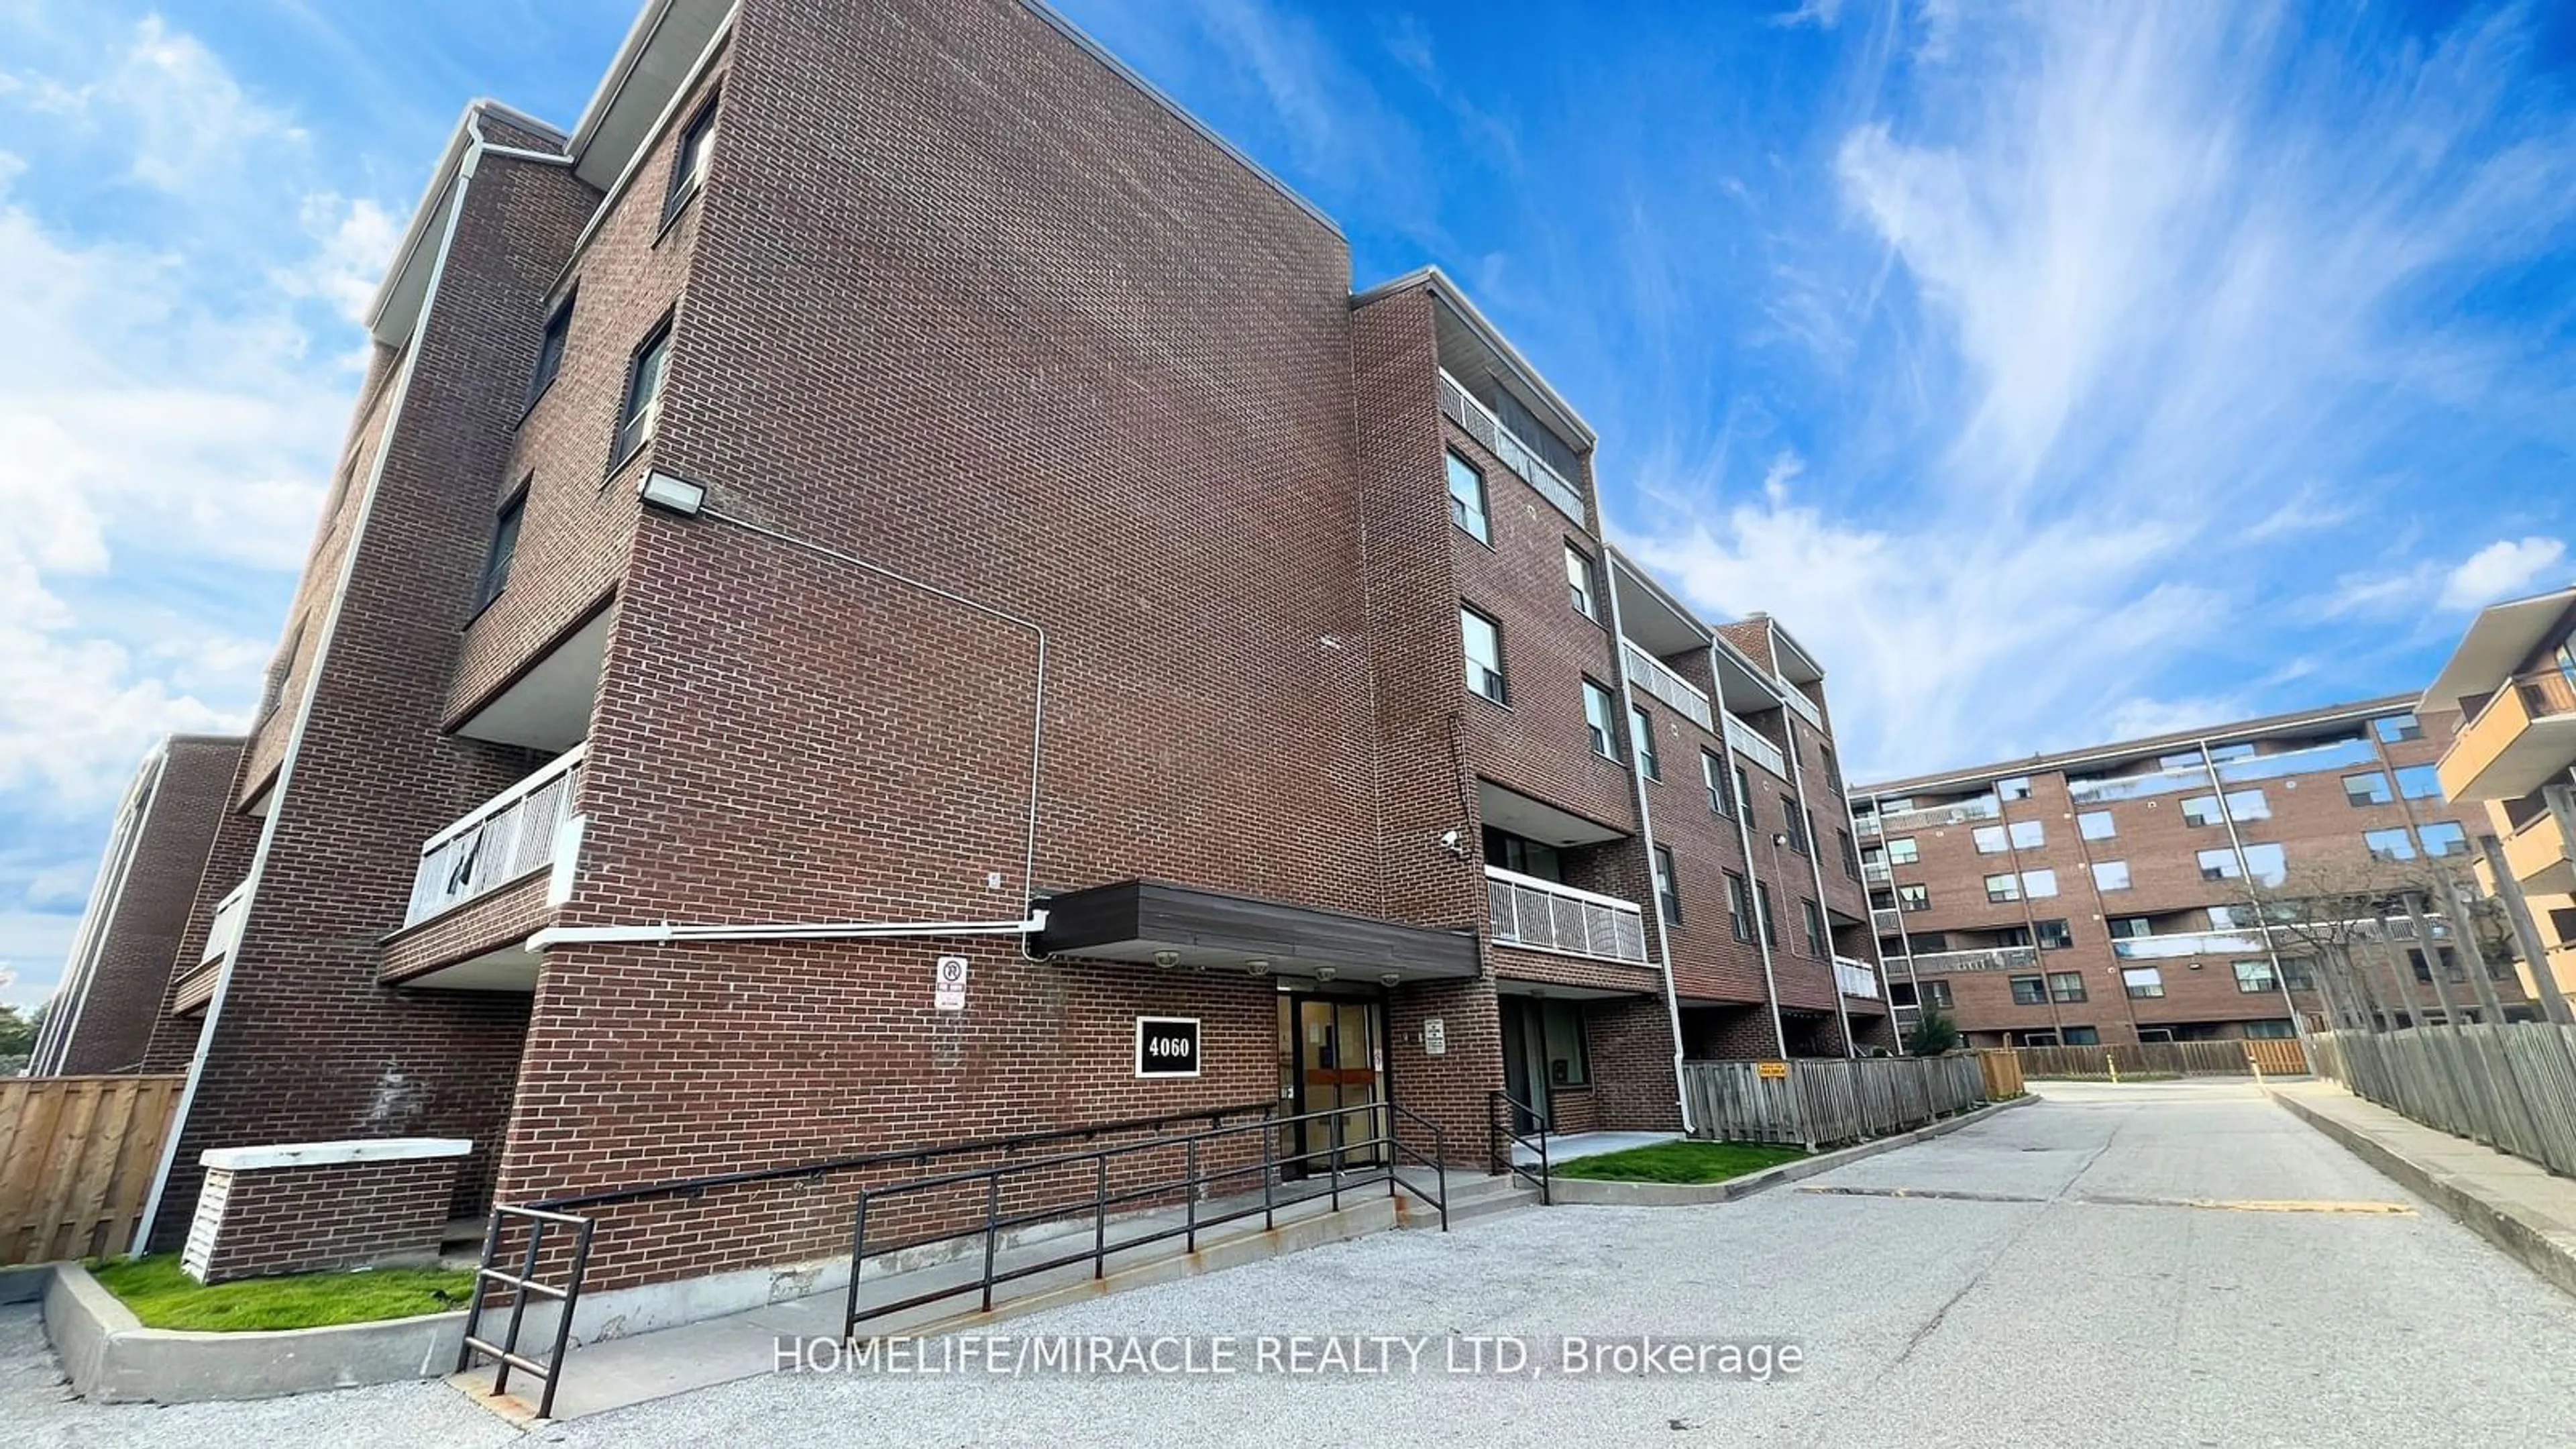 A pic from exterior of the house or condo for 4060 Lawrence Ave #524, Toronto Ontario M1E 4V4